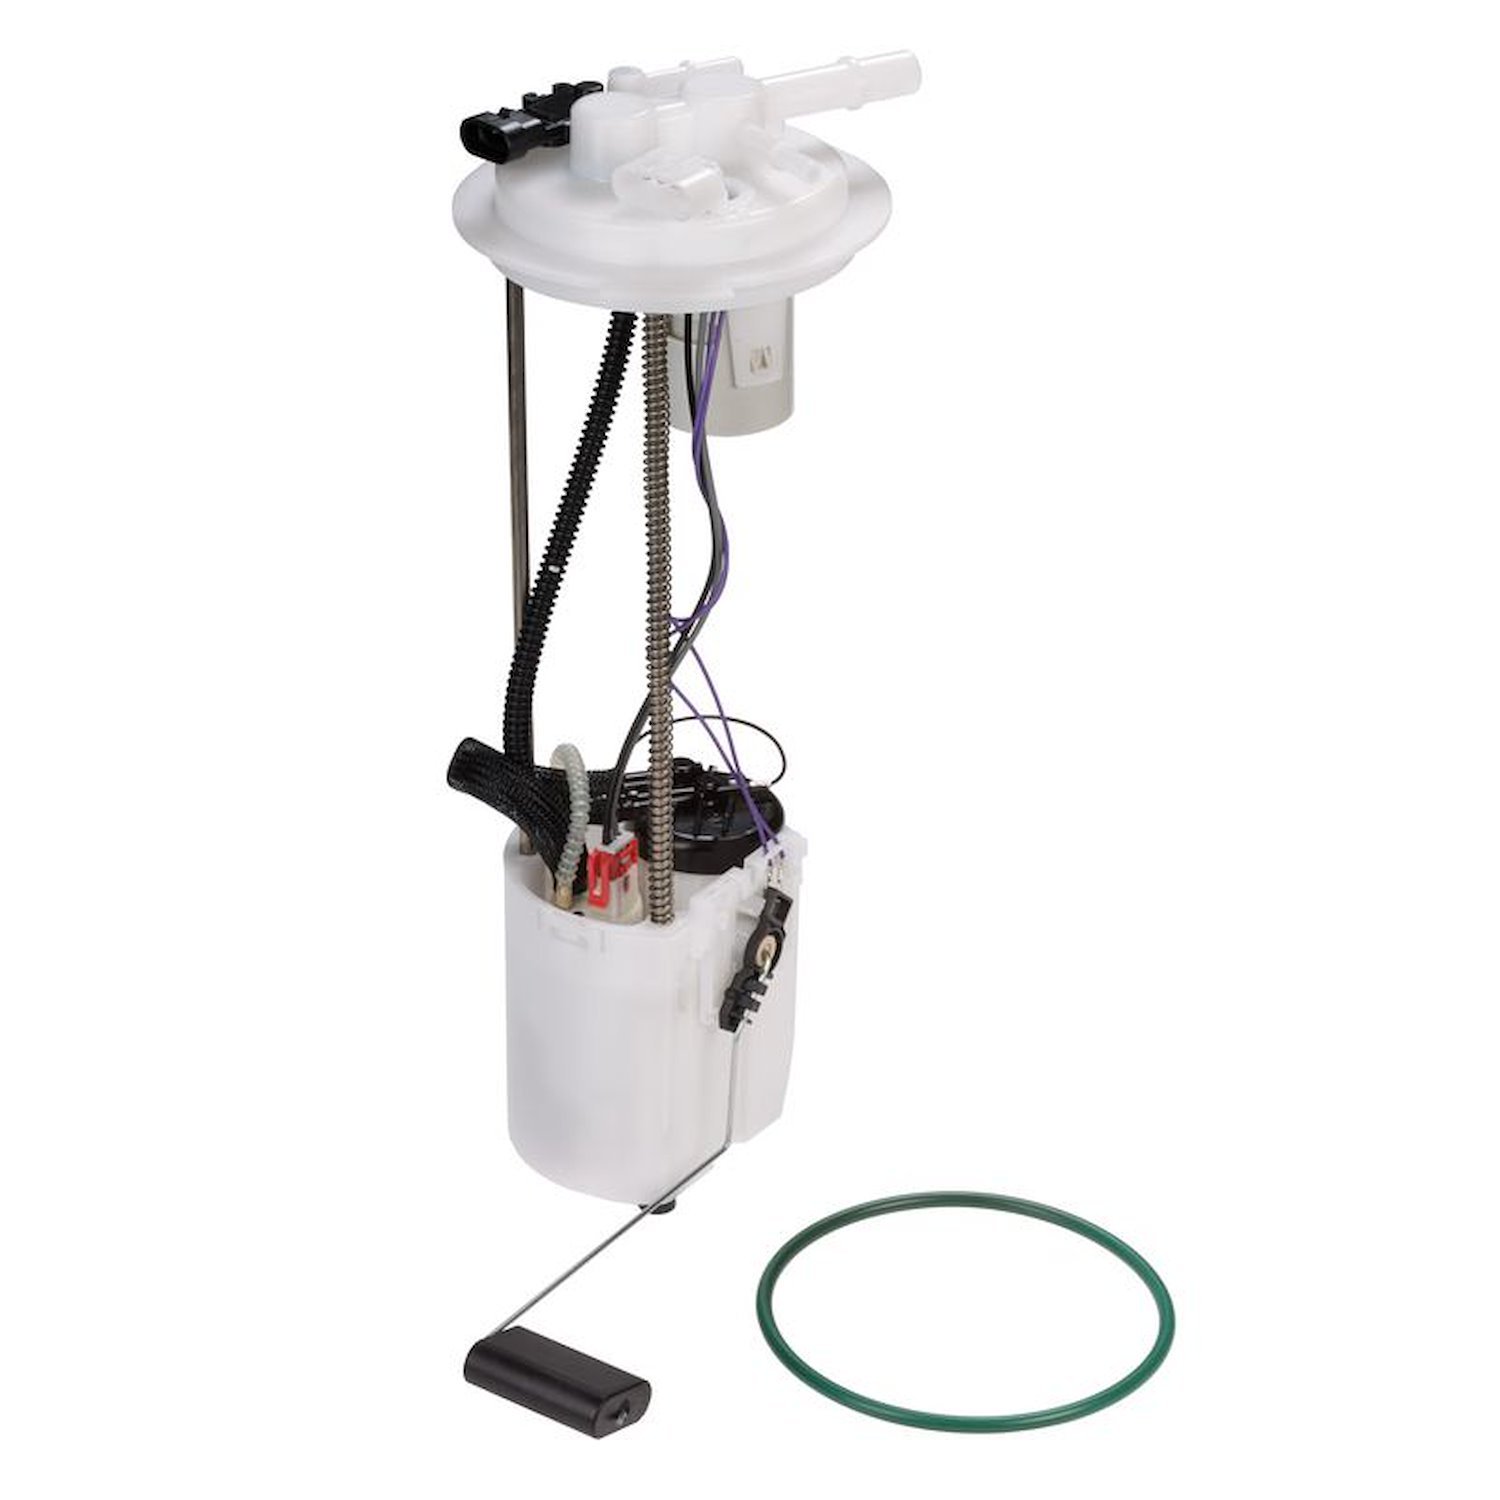 OE GM Replacement Electric Fuel Pump Module Assembly for 2007-2008 Chevy Silverado/GMC Sierra 1500